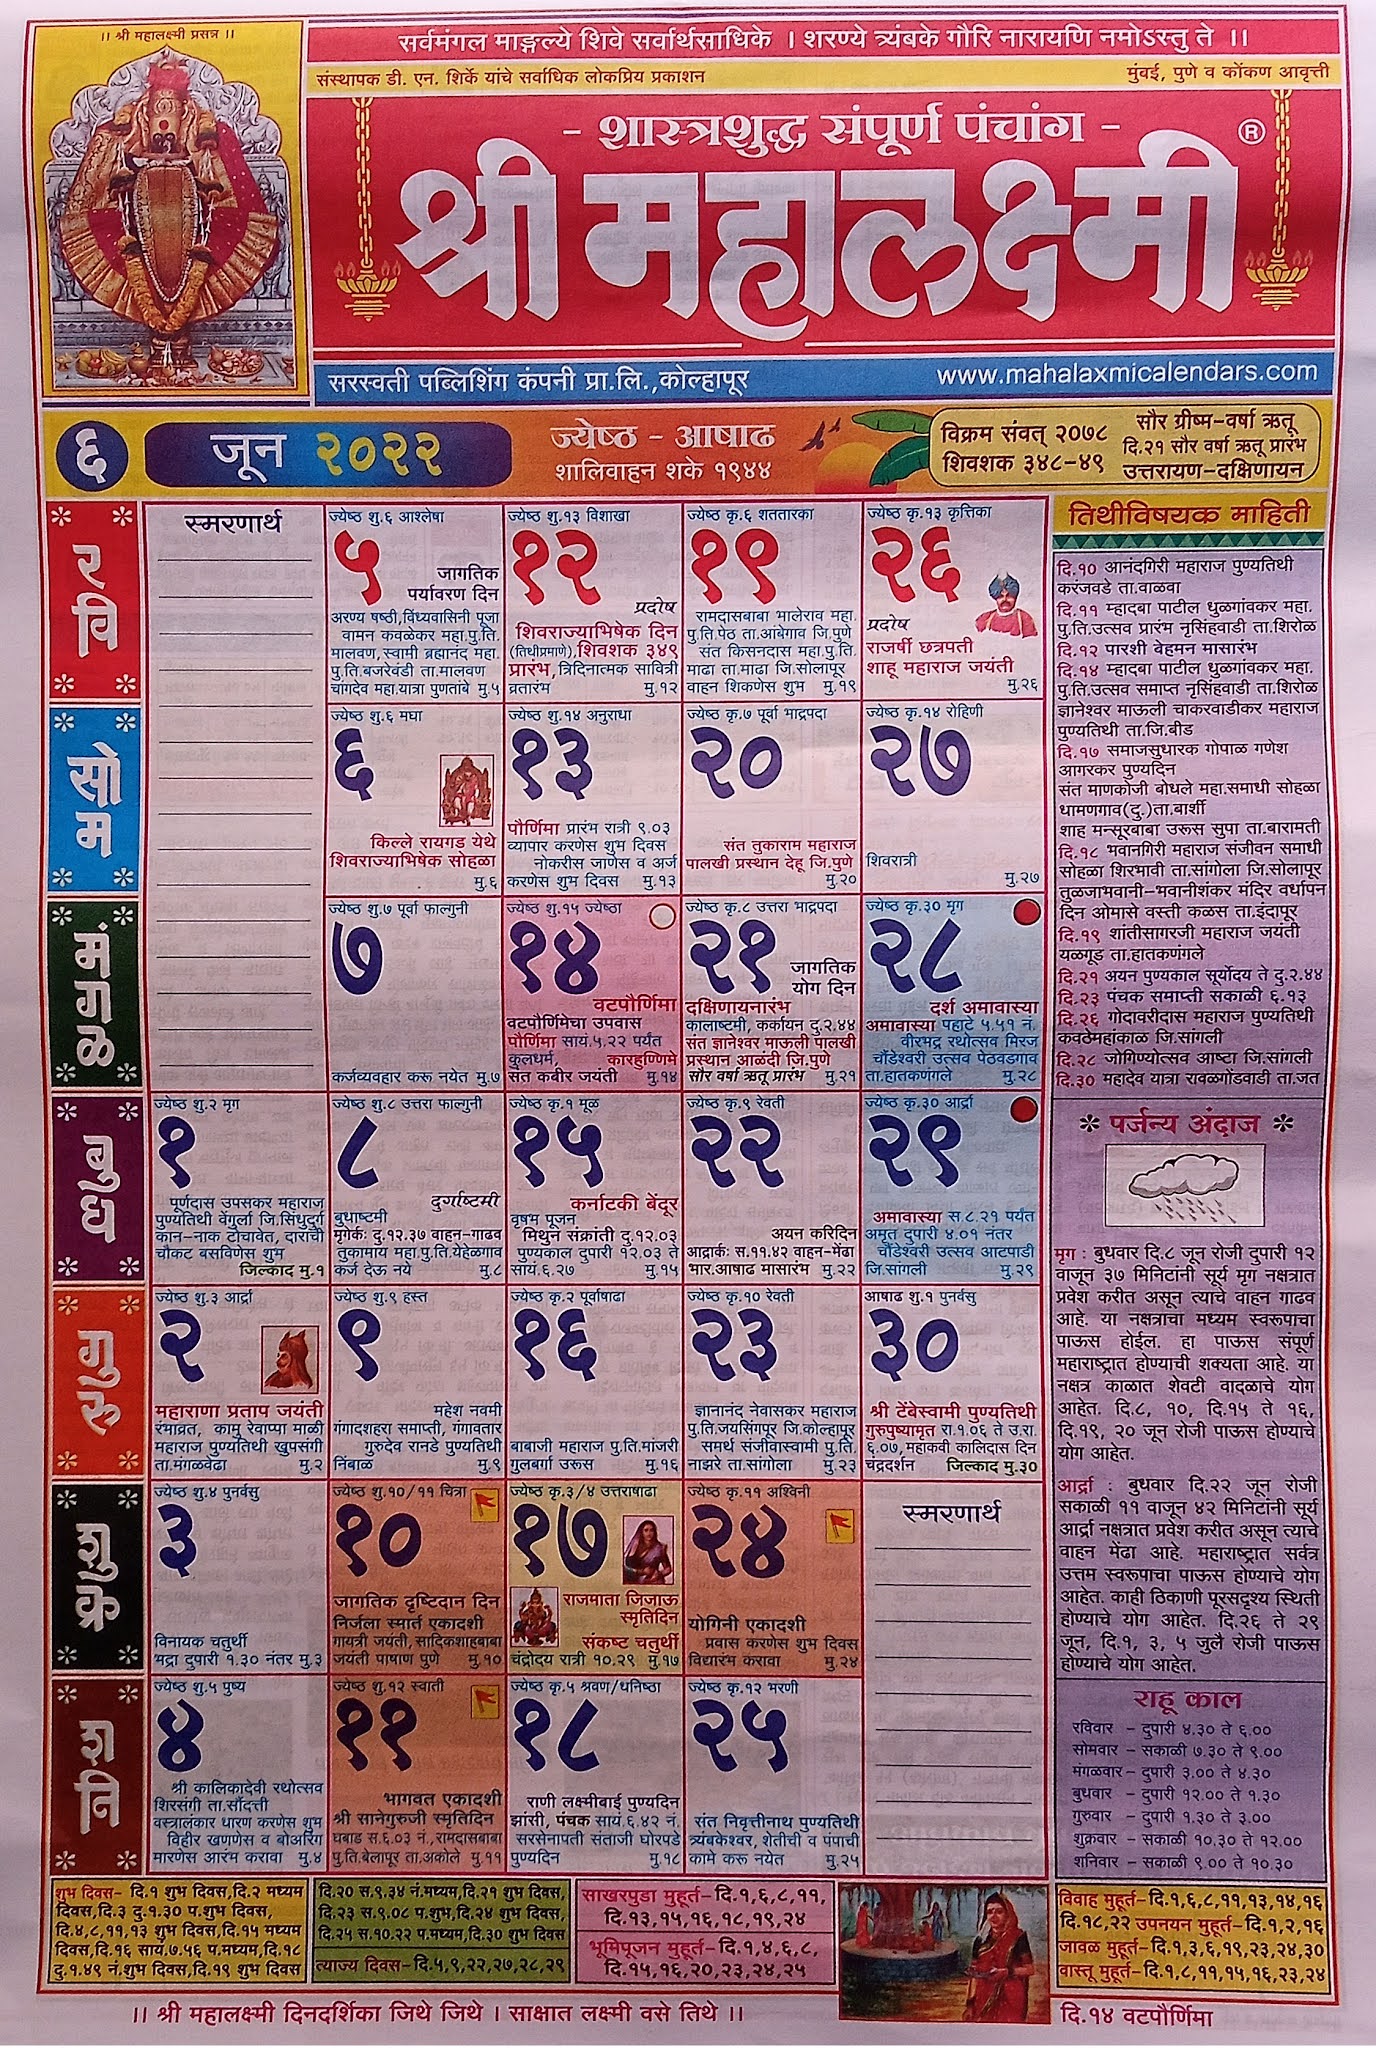 kalnirnay-panchang-periodical-marathi-office-small-pack-of-5-2018